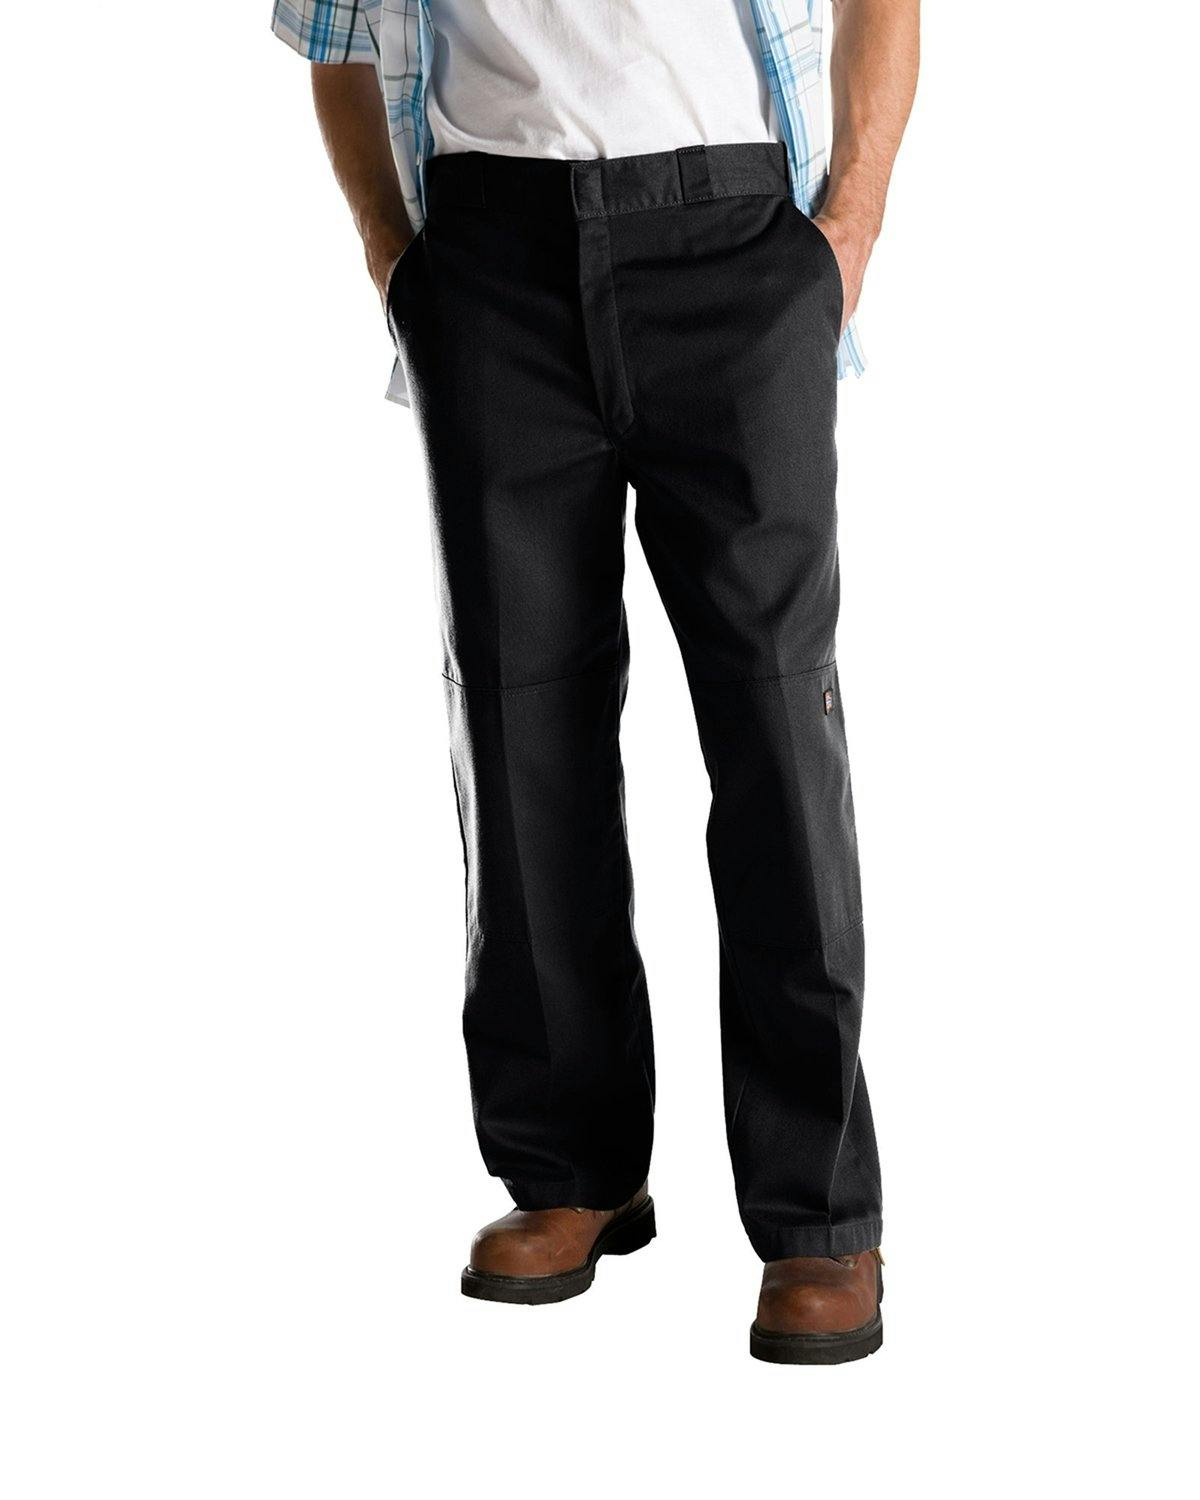 Image for Loose Fit Double Knee Work Pant